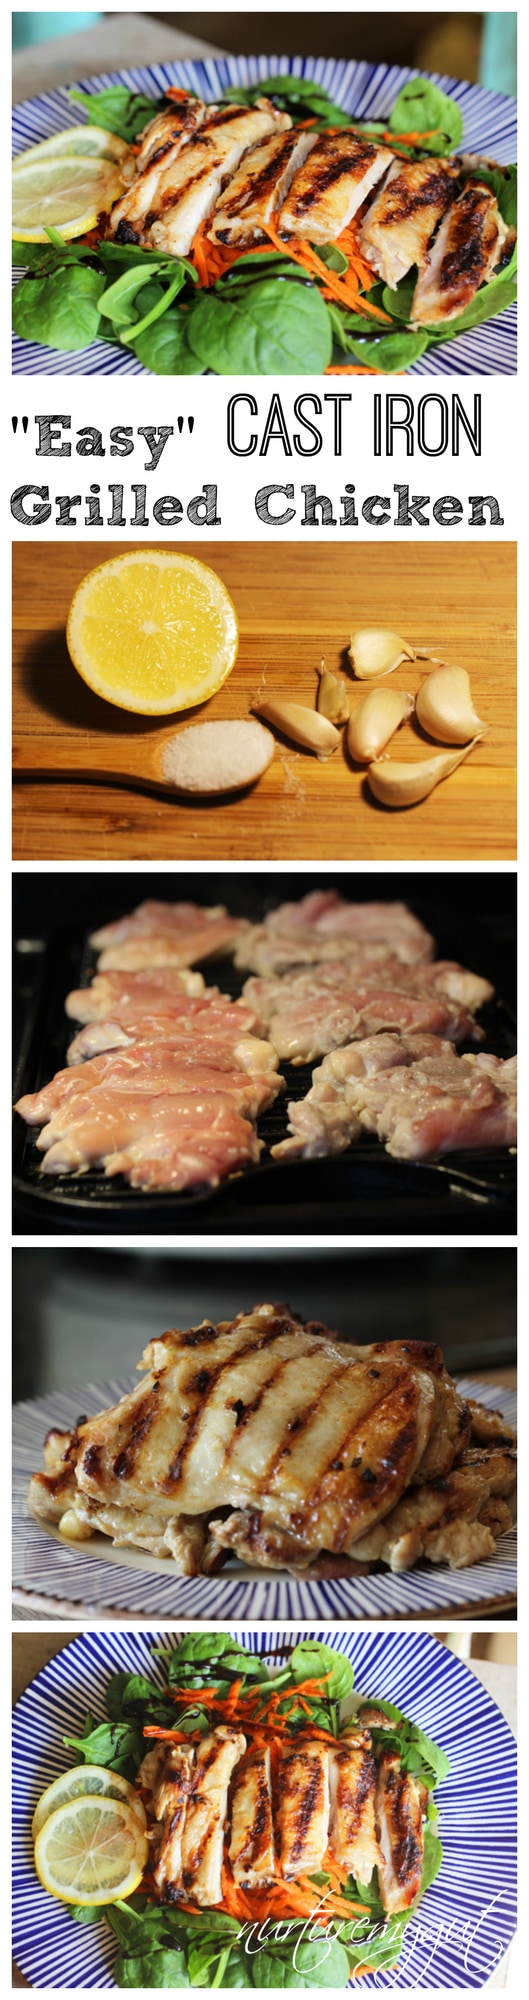 easy cast iron grilled chicken